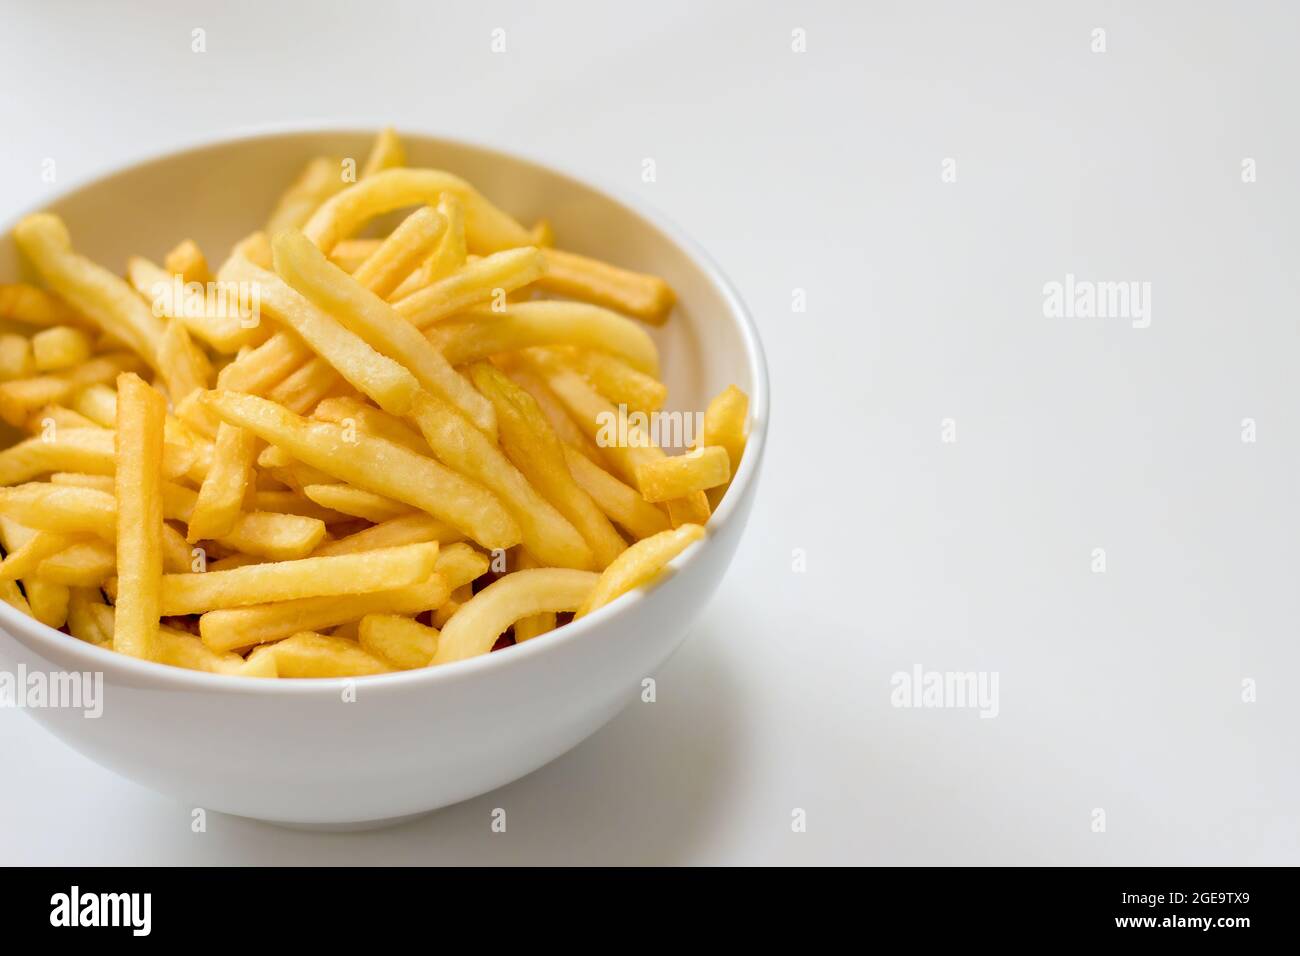 Full bowl of french fries on a white background Stock Photo